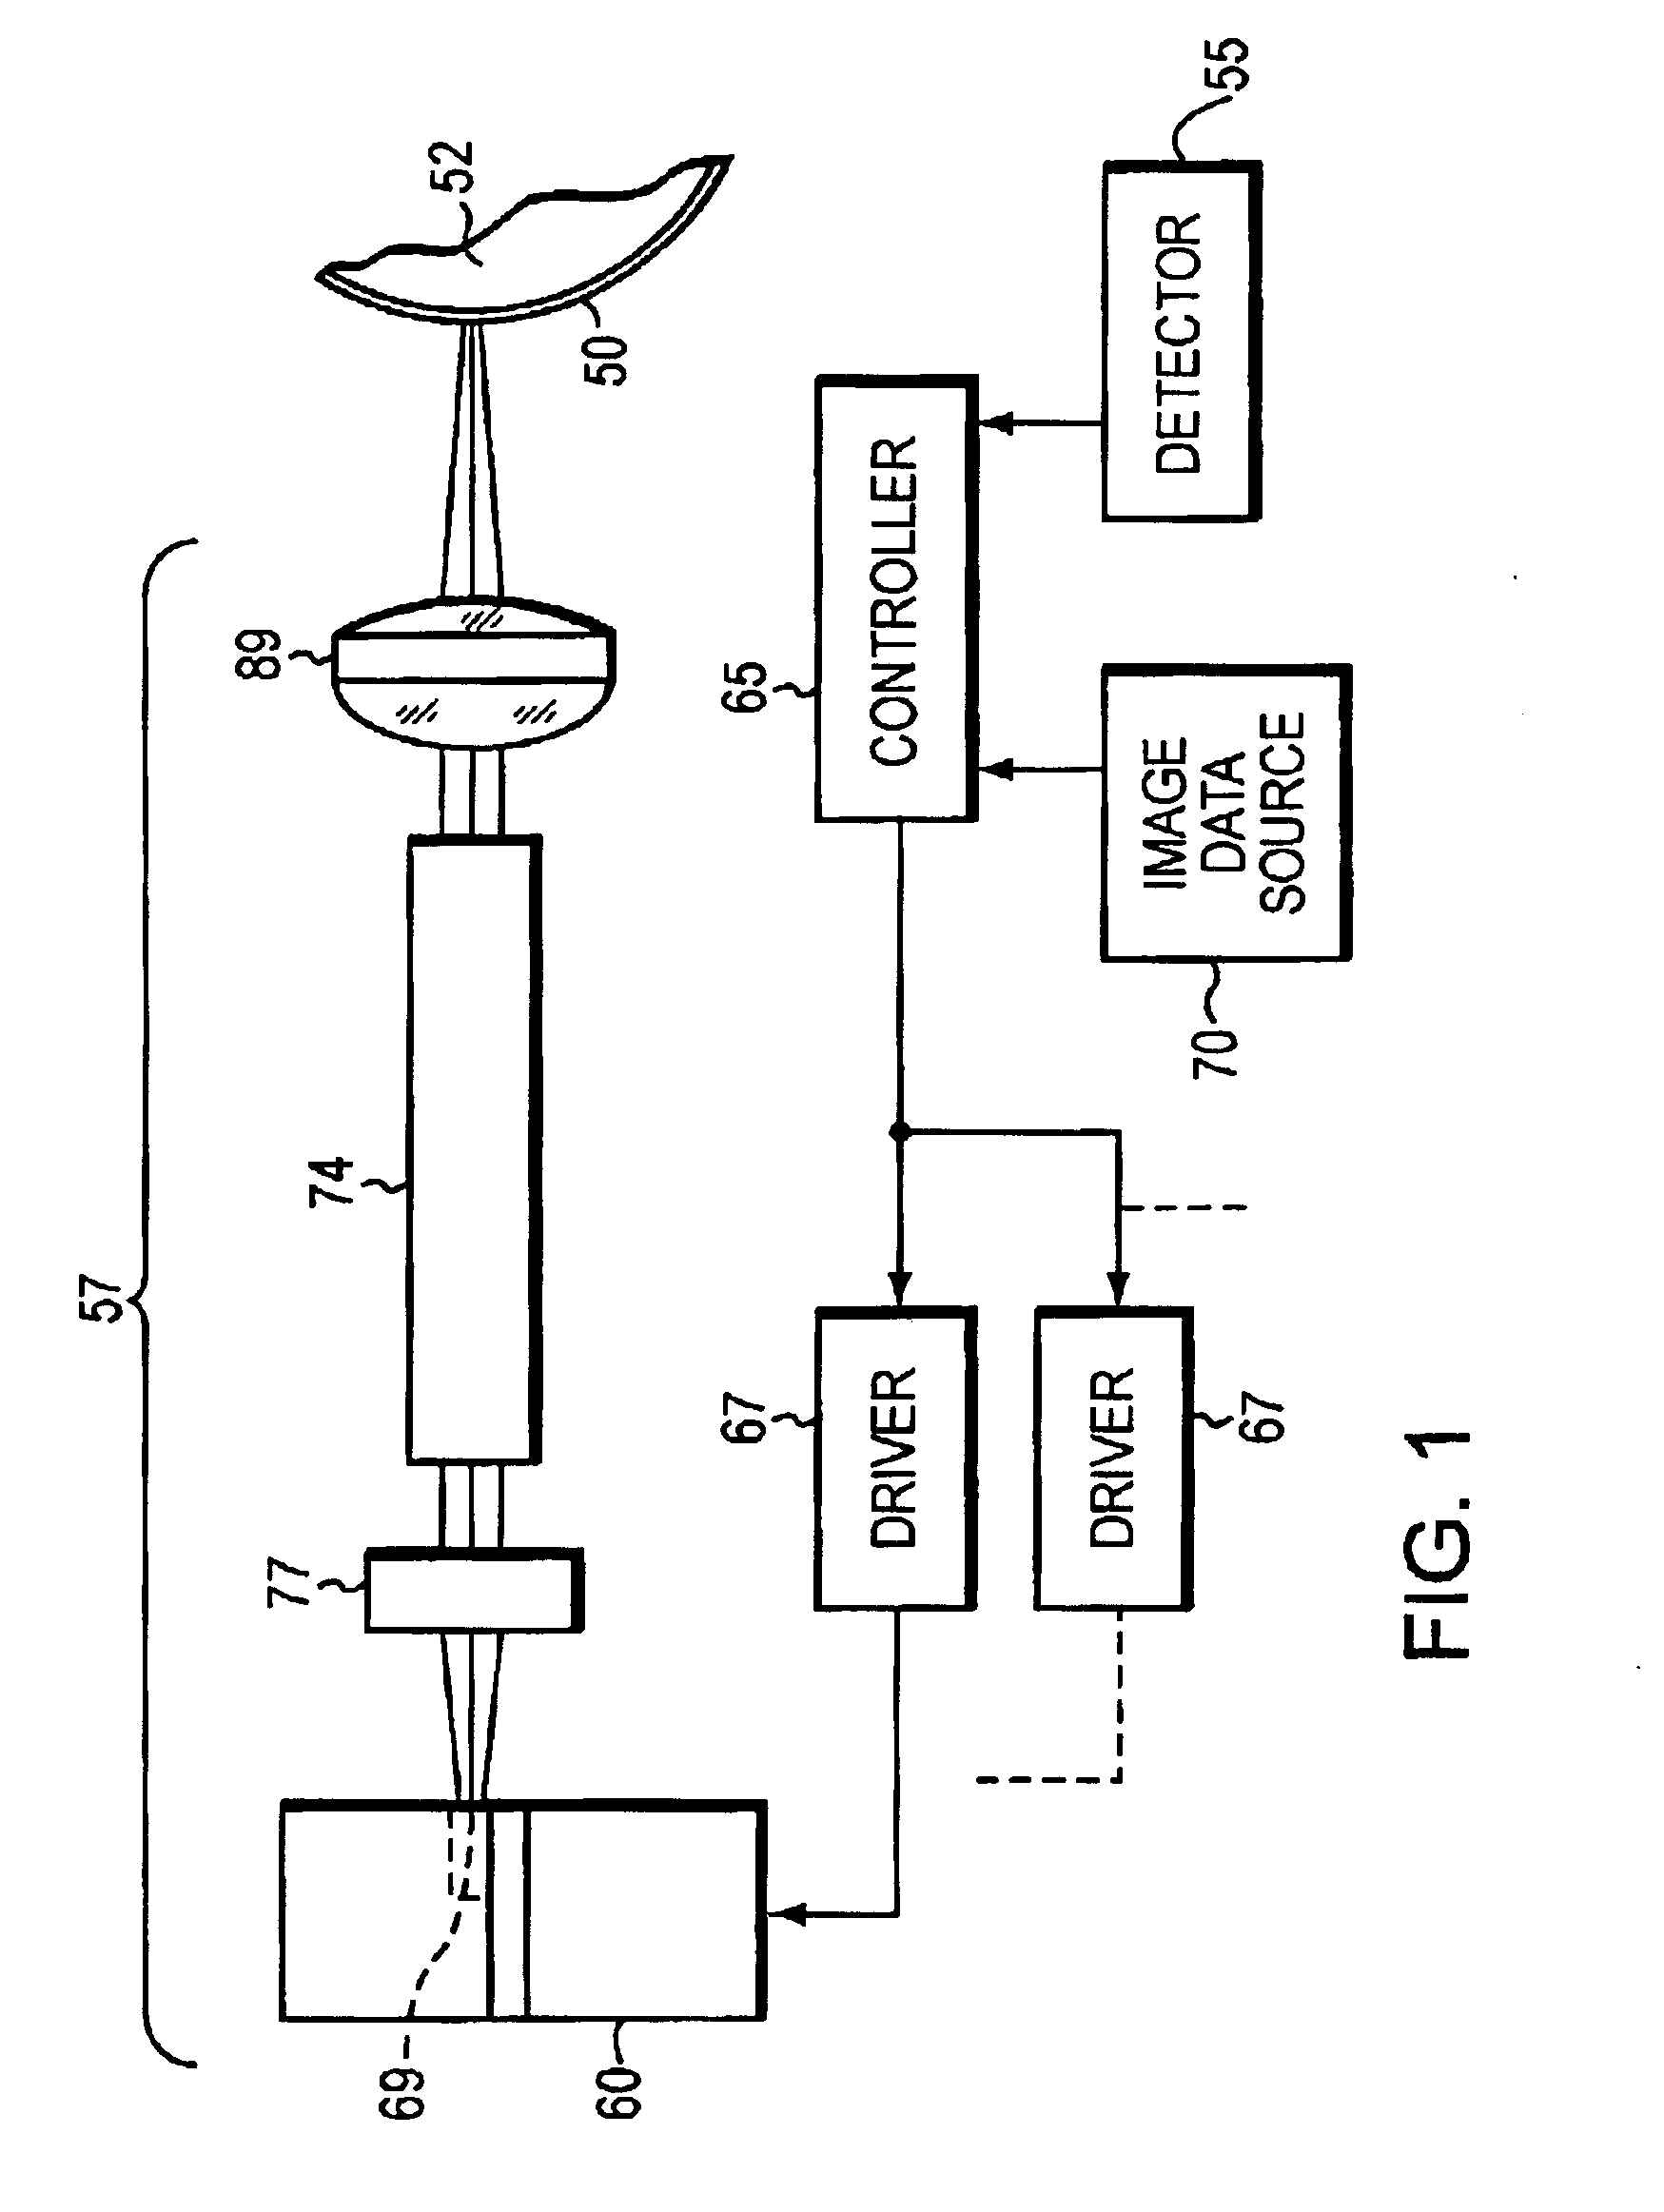 Multiple resolution helical imaging system and method